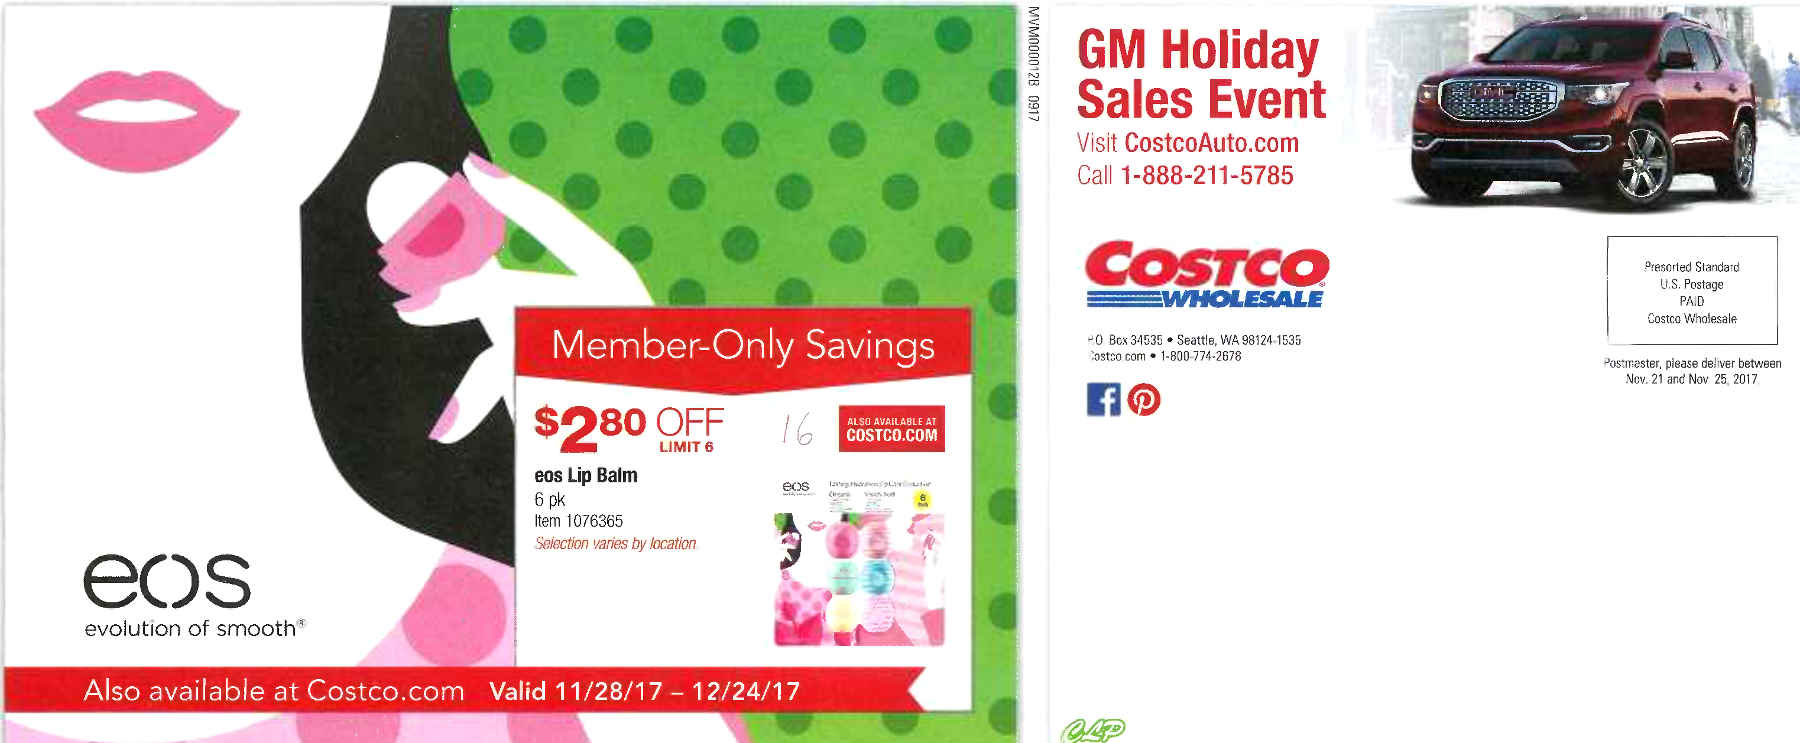 Coupon book full size page -> 16 <-